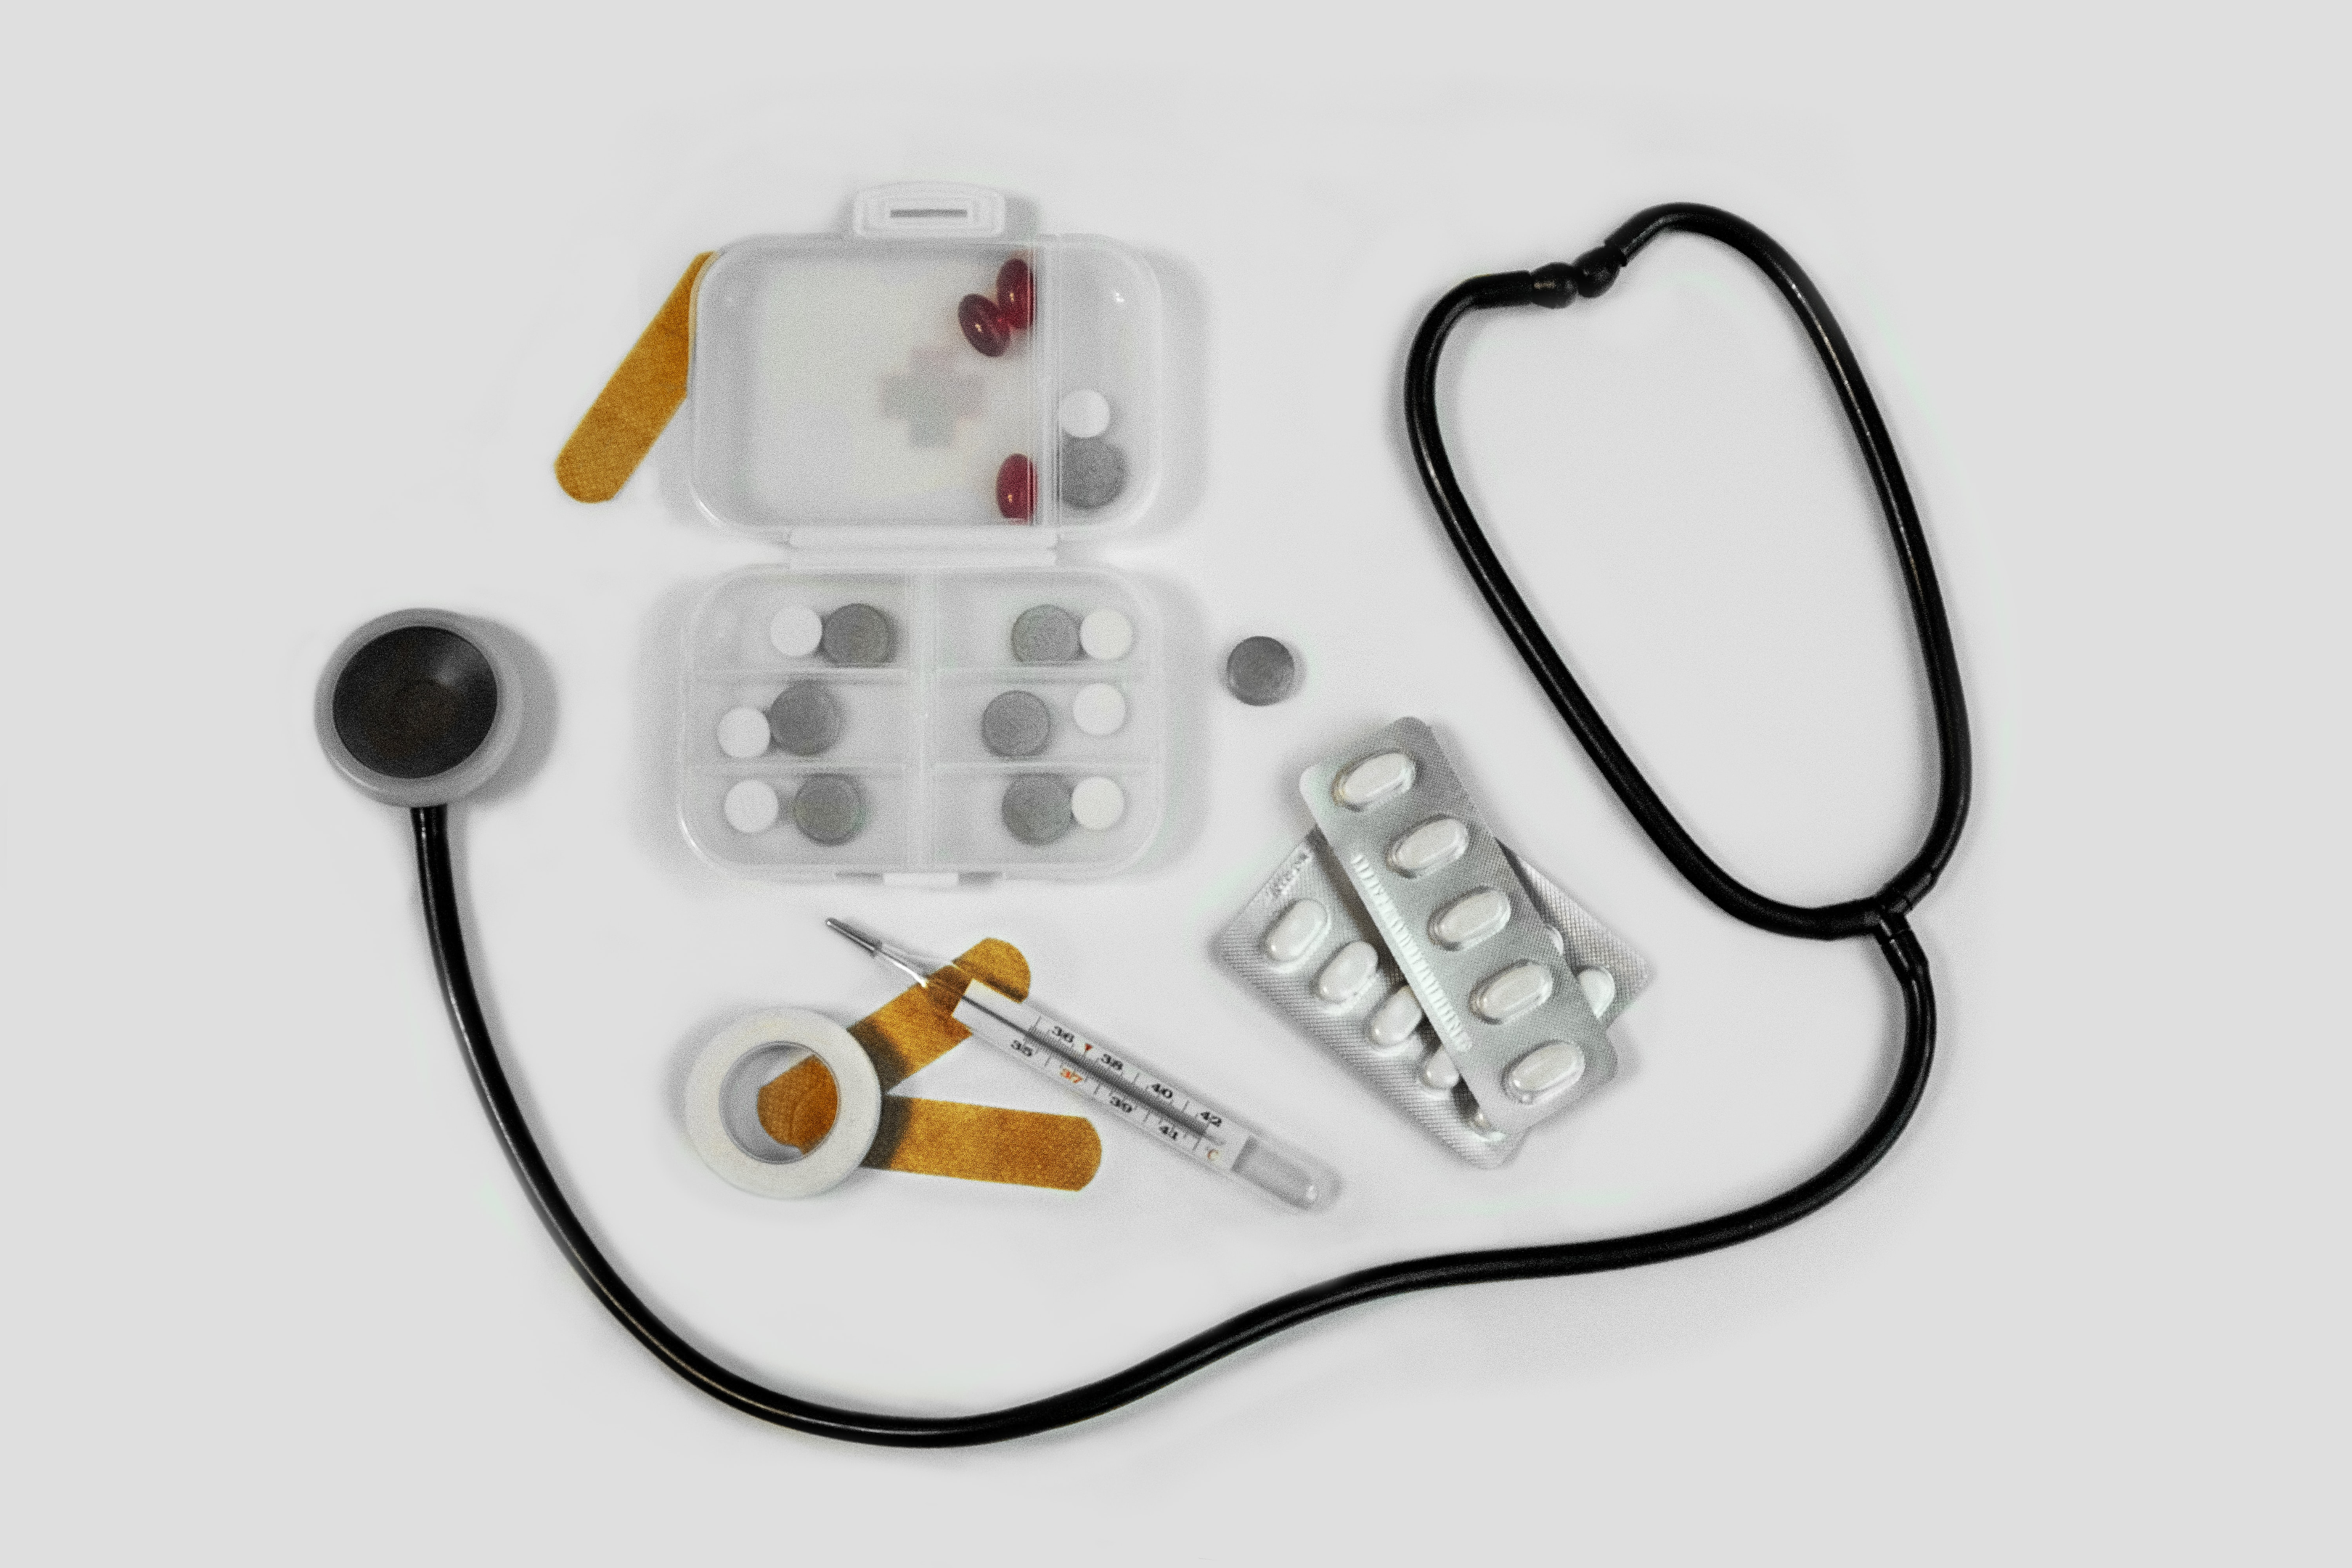 A top view of a stethoscope with medicines, bandages, and a thermometer kept together.